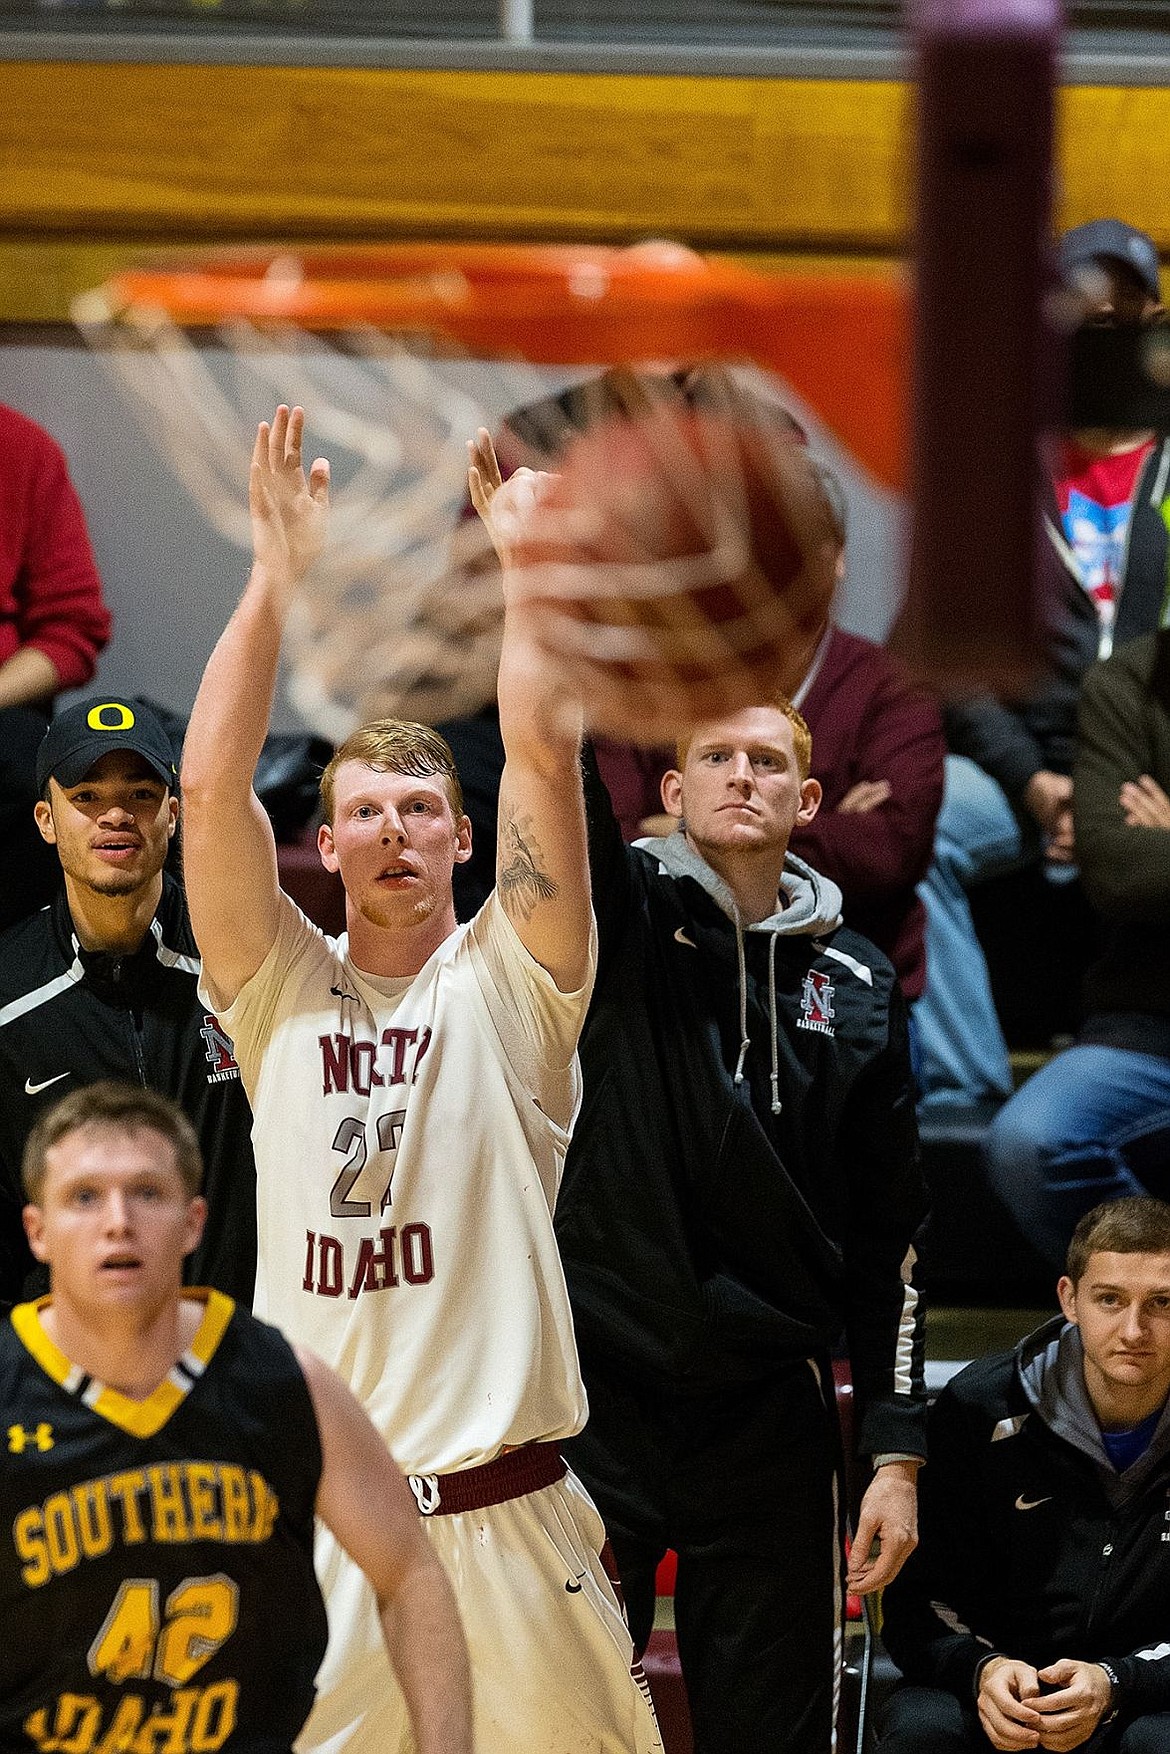 &lt;p&gt;SHAWN GUST/Press North Idaho College&#146;s Kyle Guice sinks a three-point shot during the second half against College of Southern Idaho.&lt;/p&gt;